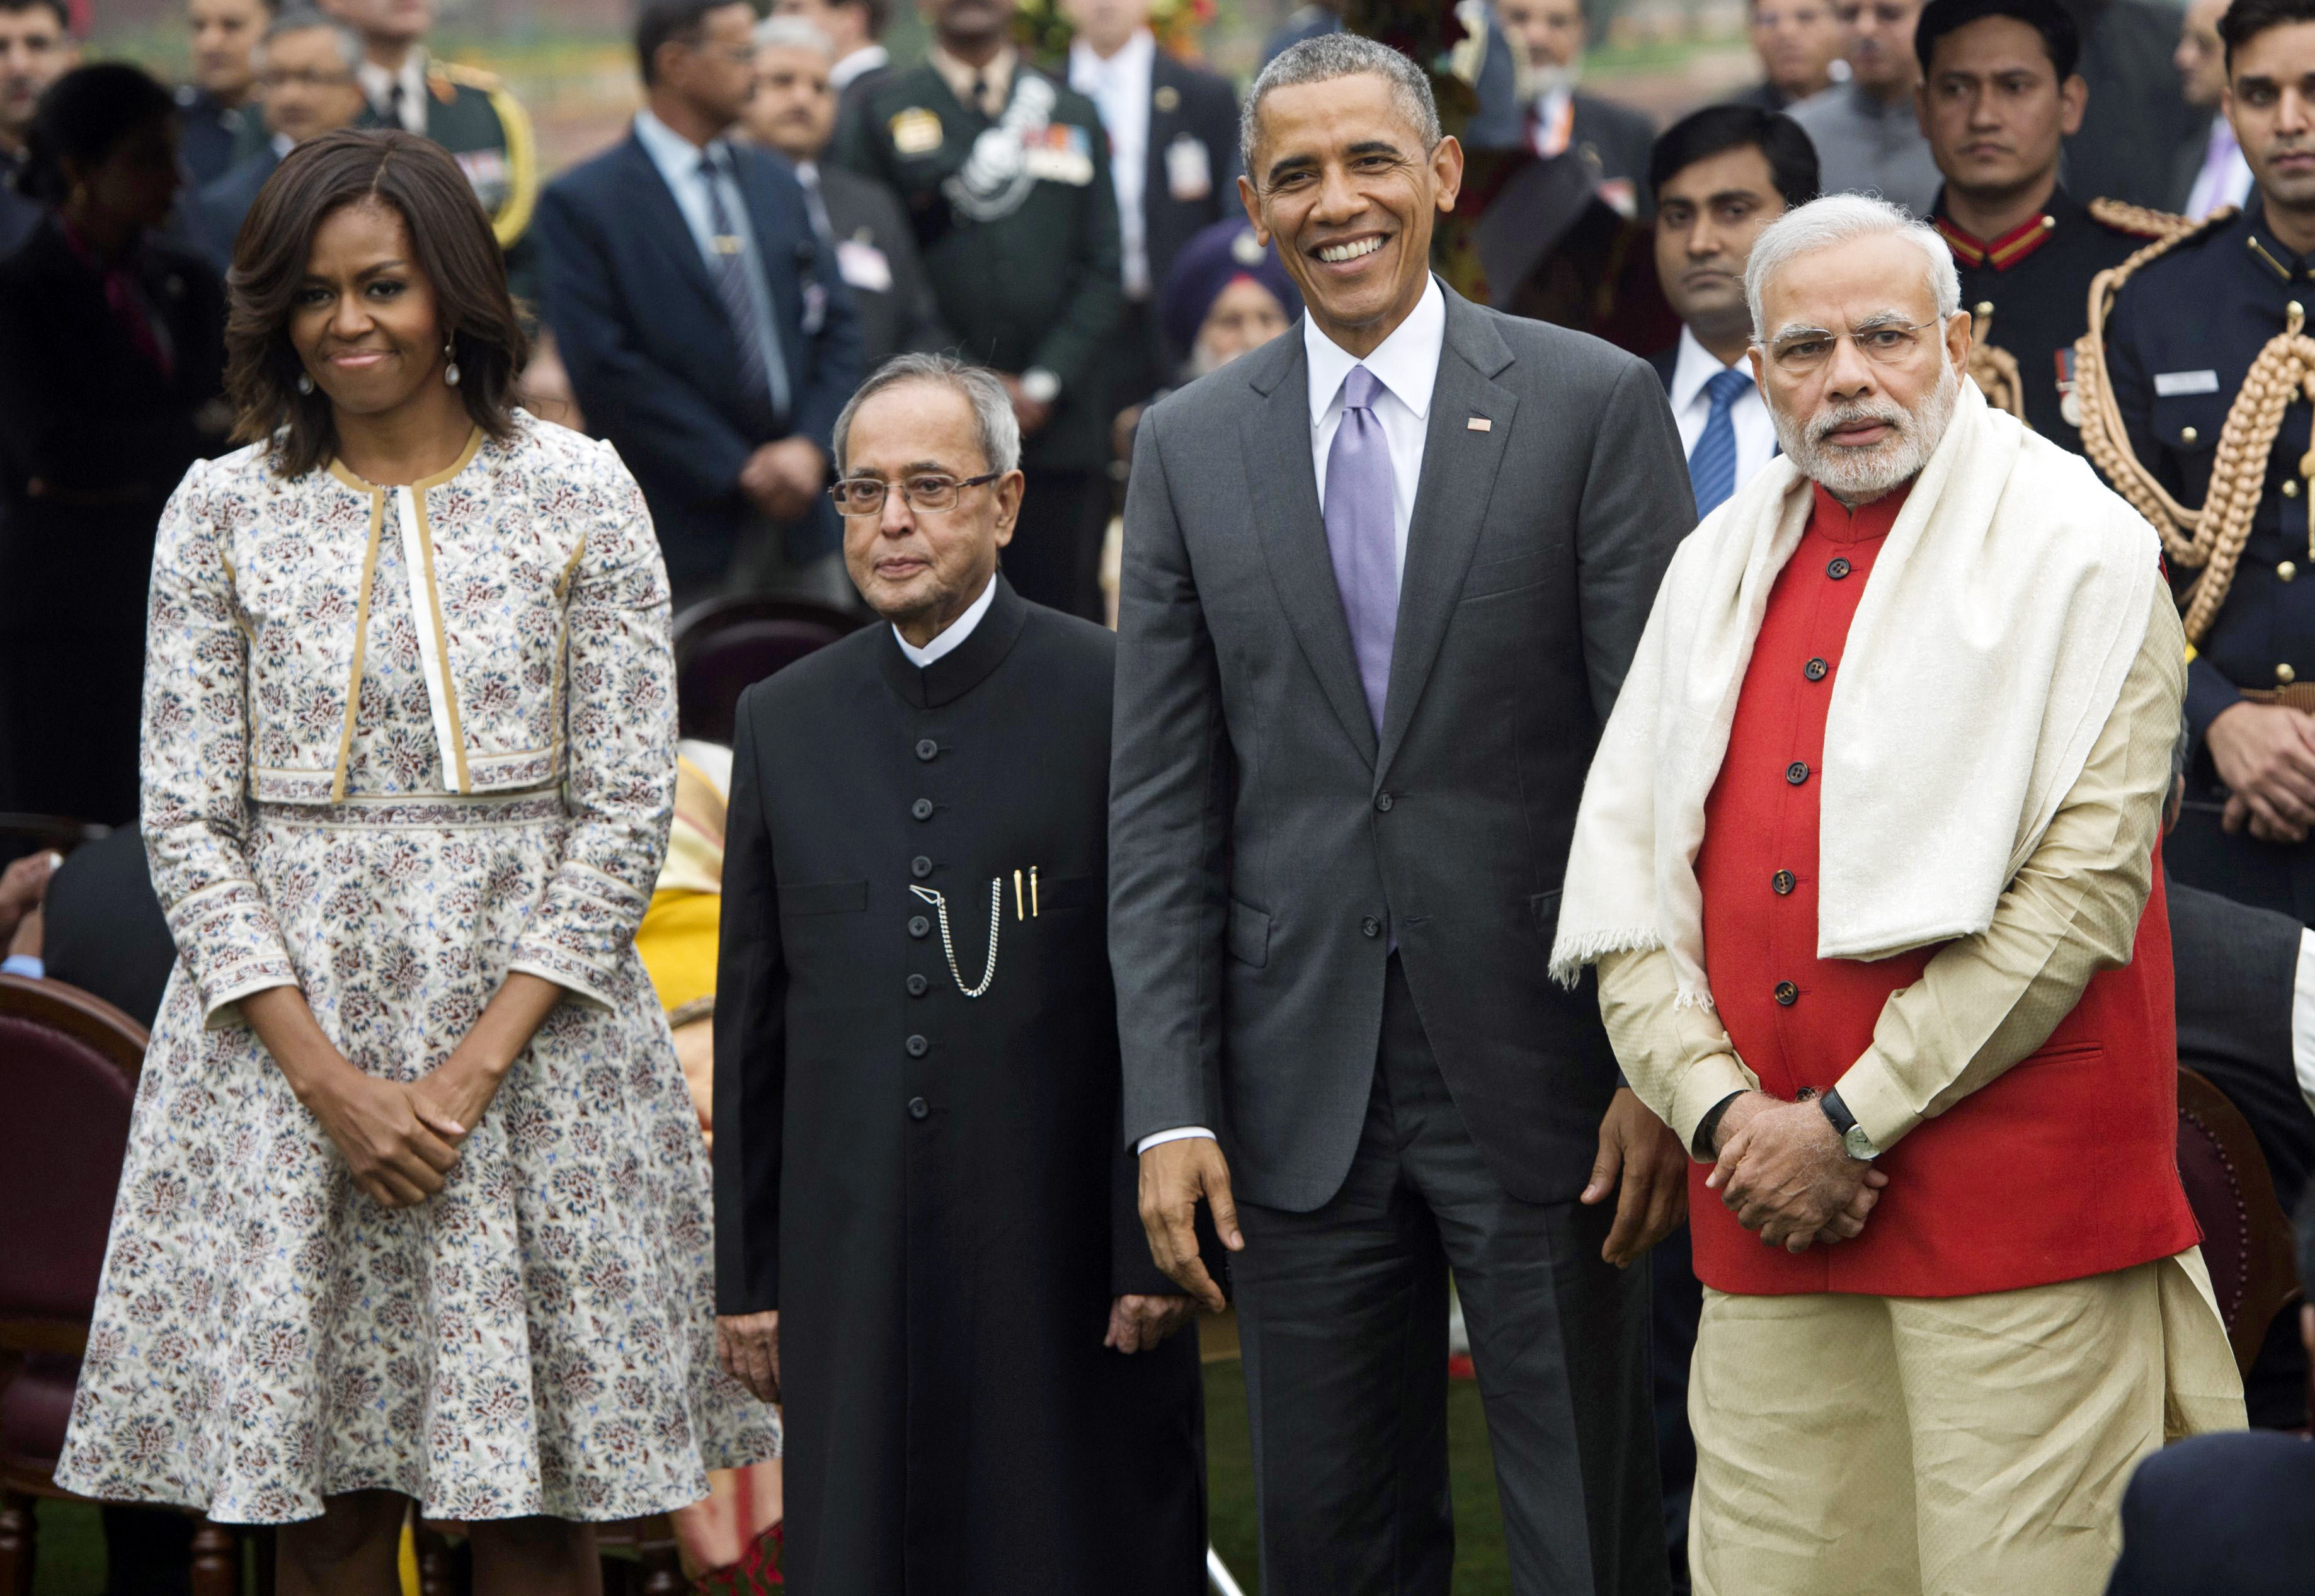 From left: First Lady Michelle Obama, Indian President Pranab Mukherjee, President Barack Obama, and Indian Prime Minister Narendra Modi attend a reception at Rashtrapati Bhawan, the Presidential Palace, in New Delhi on Jan. 26, 2015.